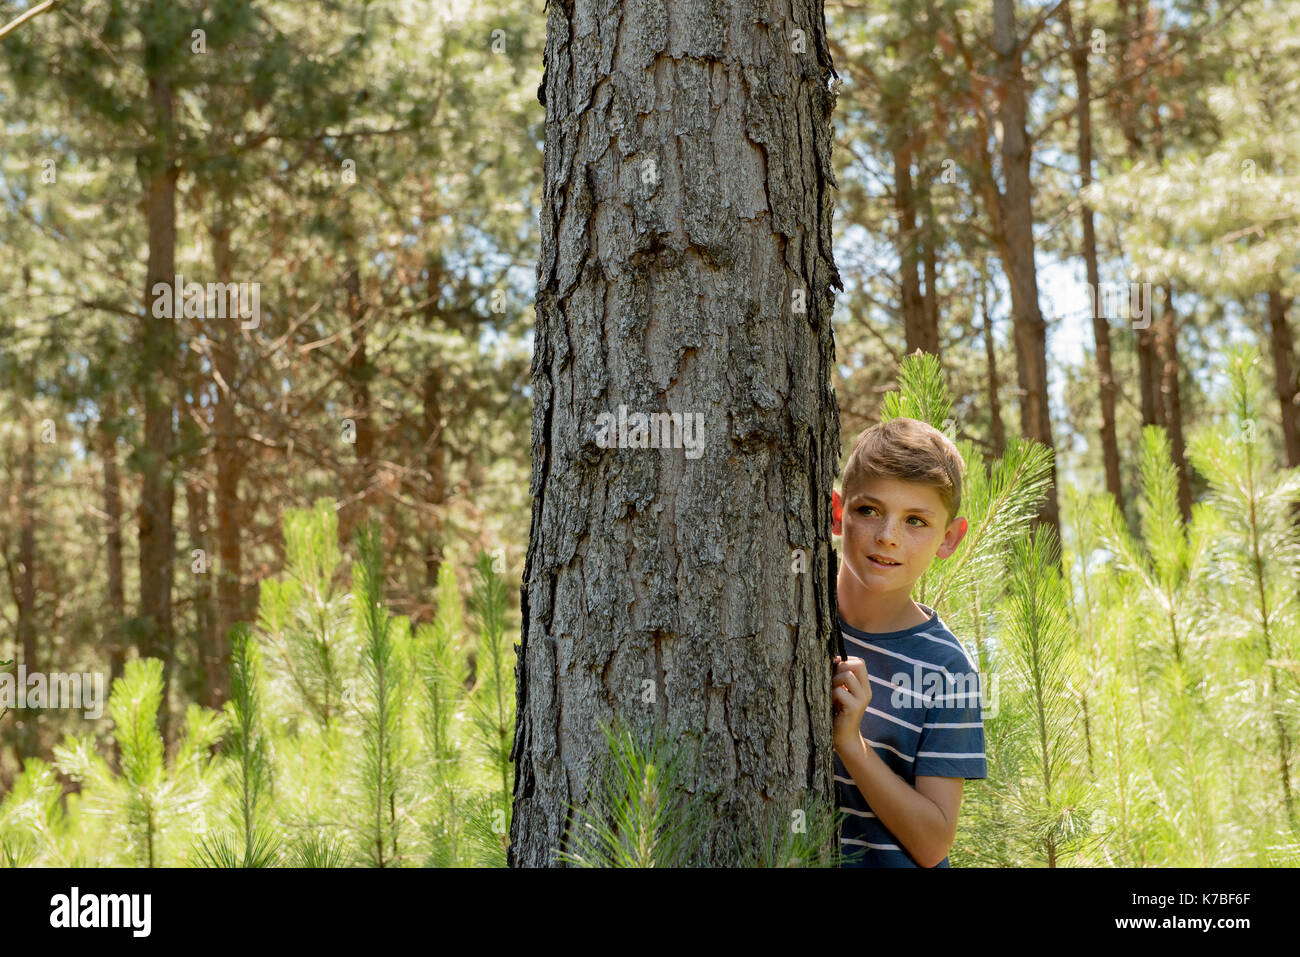 Boy Hiding behind tree trunk Banque D'Images